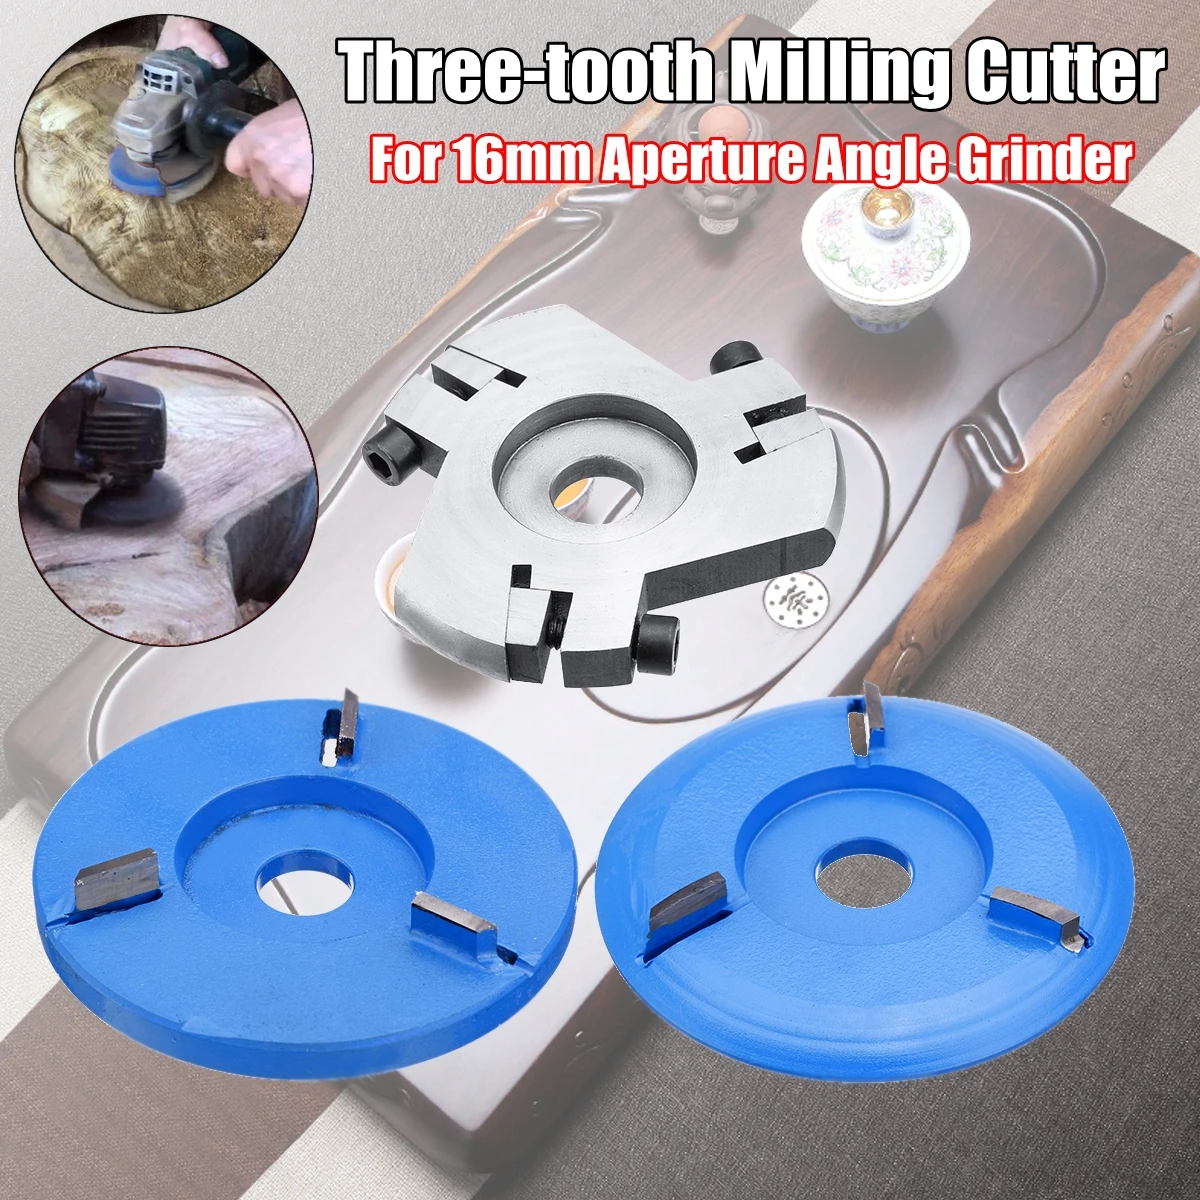 

16mm Aperture Angle Grinder Woodworking Three-tooth Turbo Plane Wood Milling Cutter Carving Blade Digging Wood Carving Disc Tool